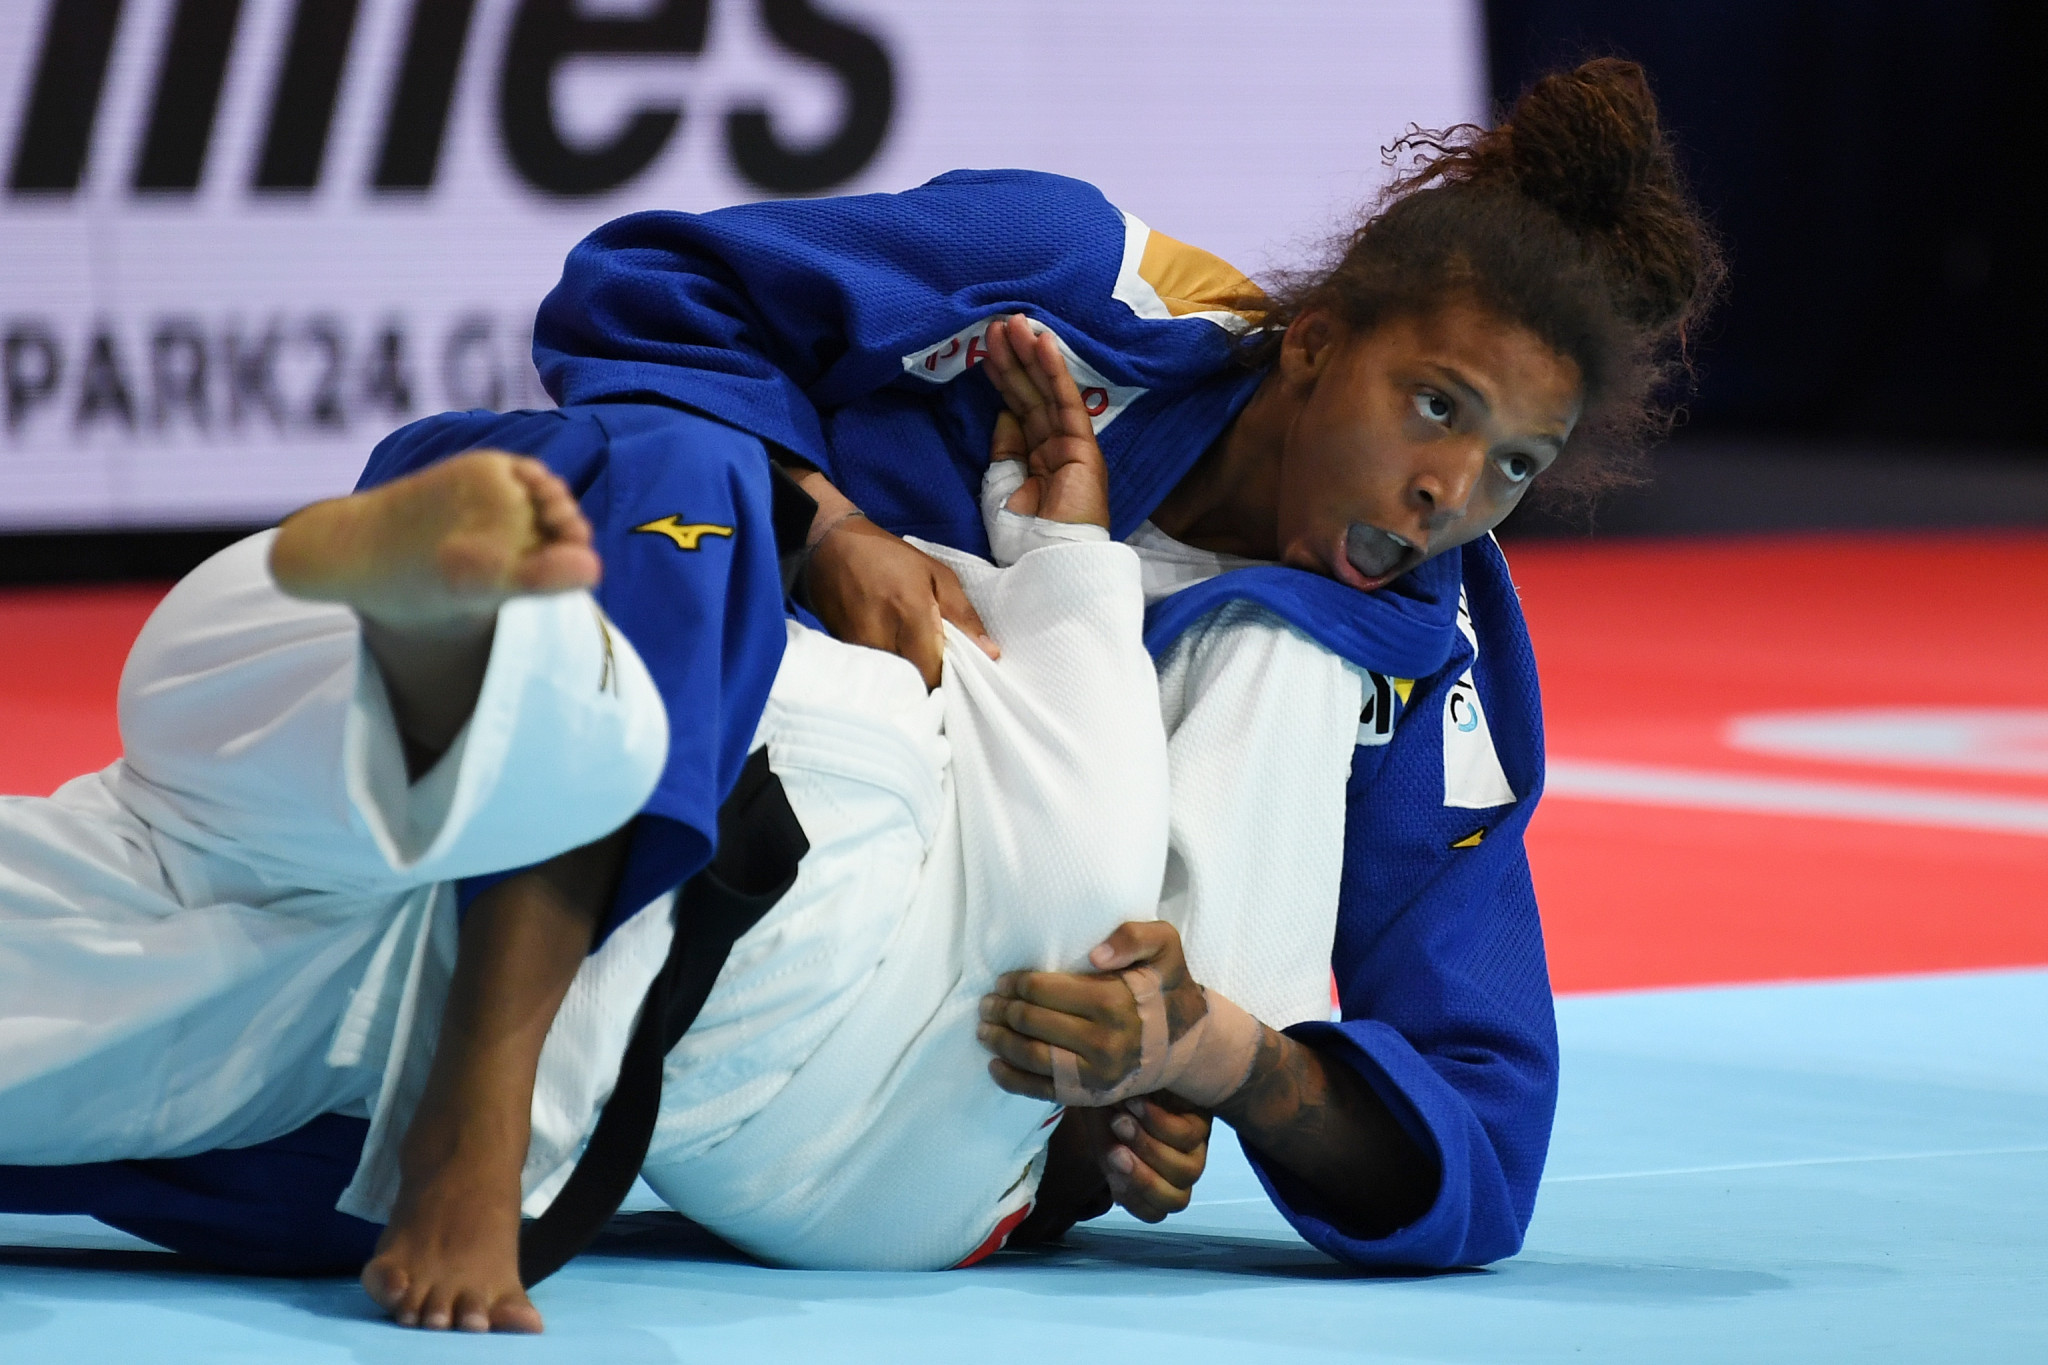 Rio 2016 Olympic champion Rafaela Silva took home the bronze medal in Tokyo ©Getty Images